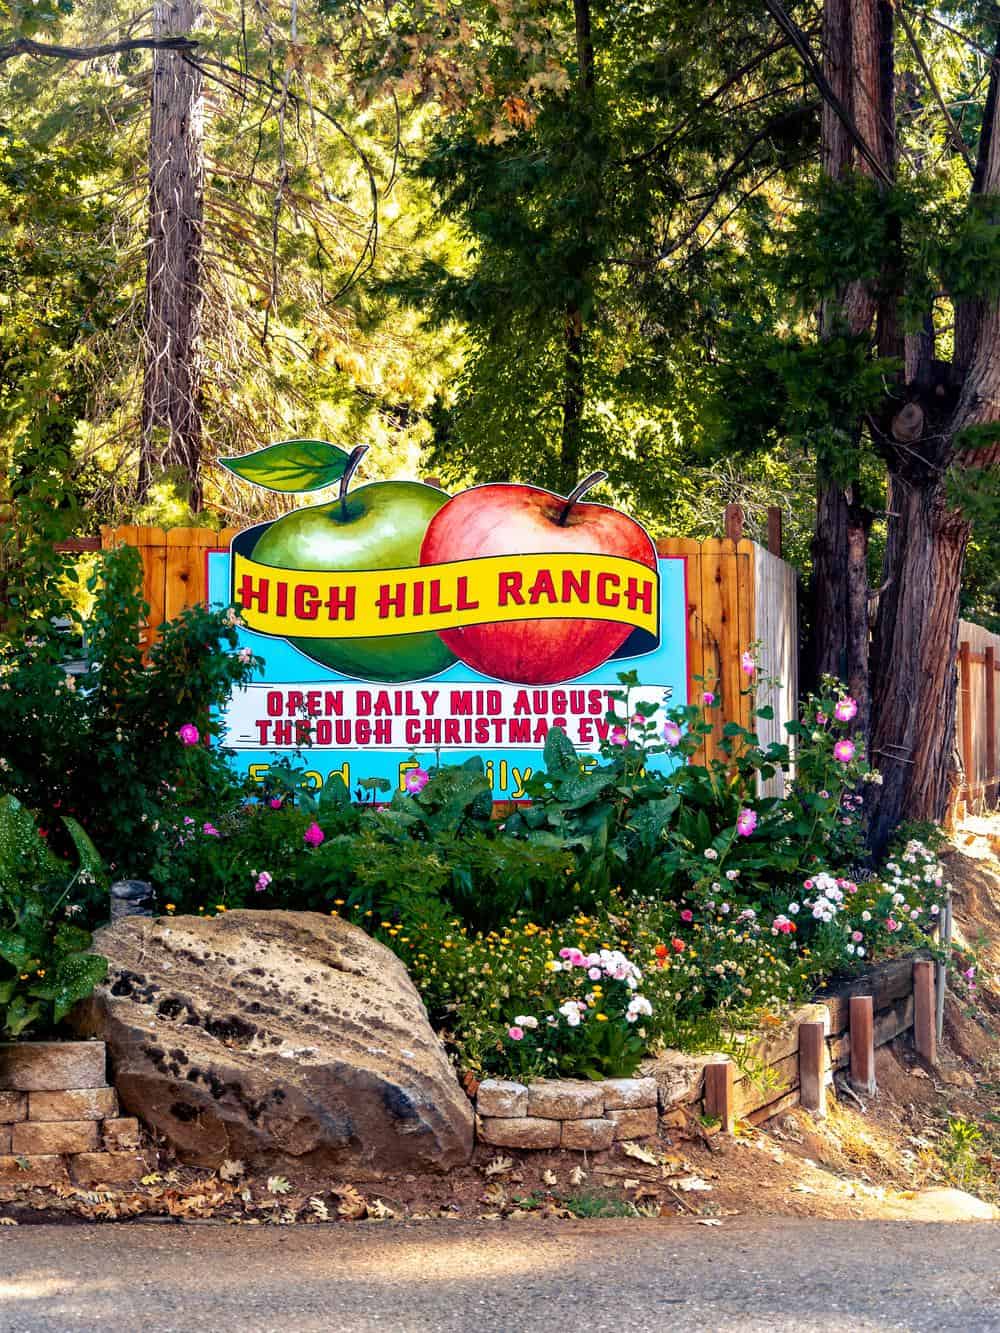 Entrance to High Hill Ranch